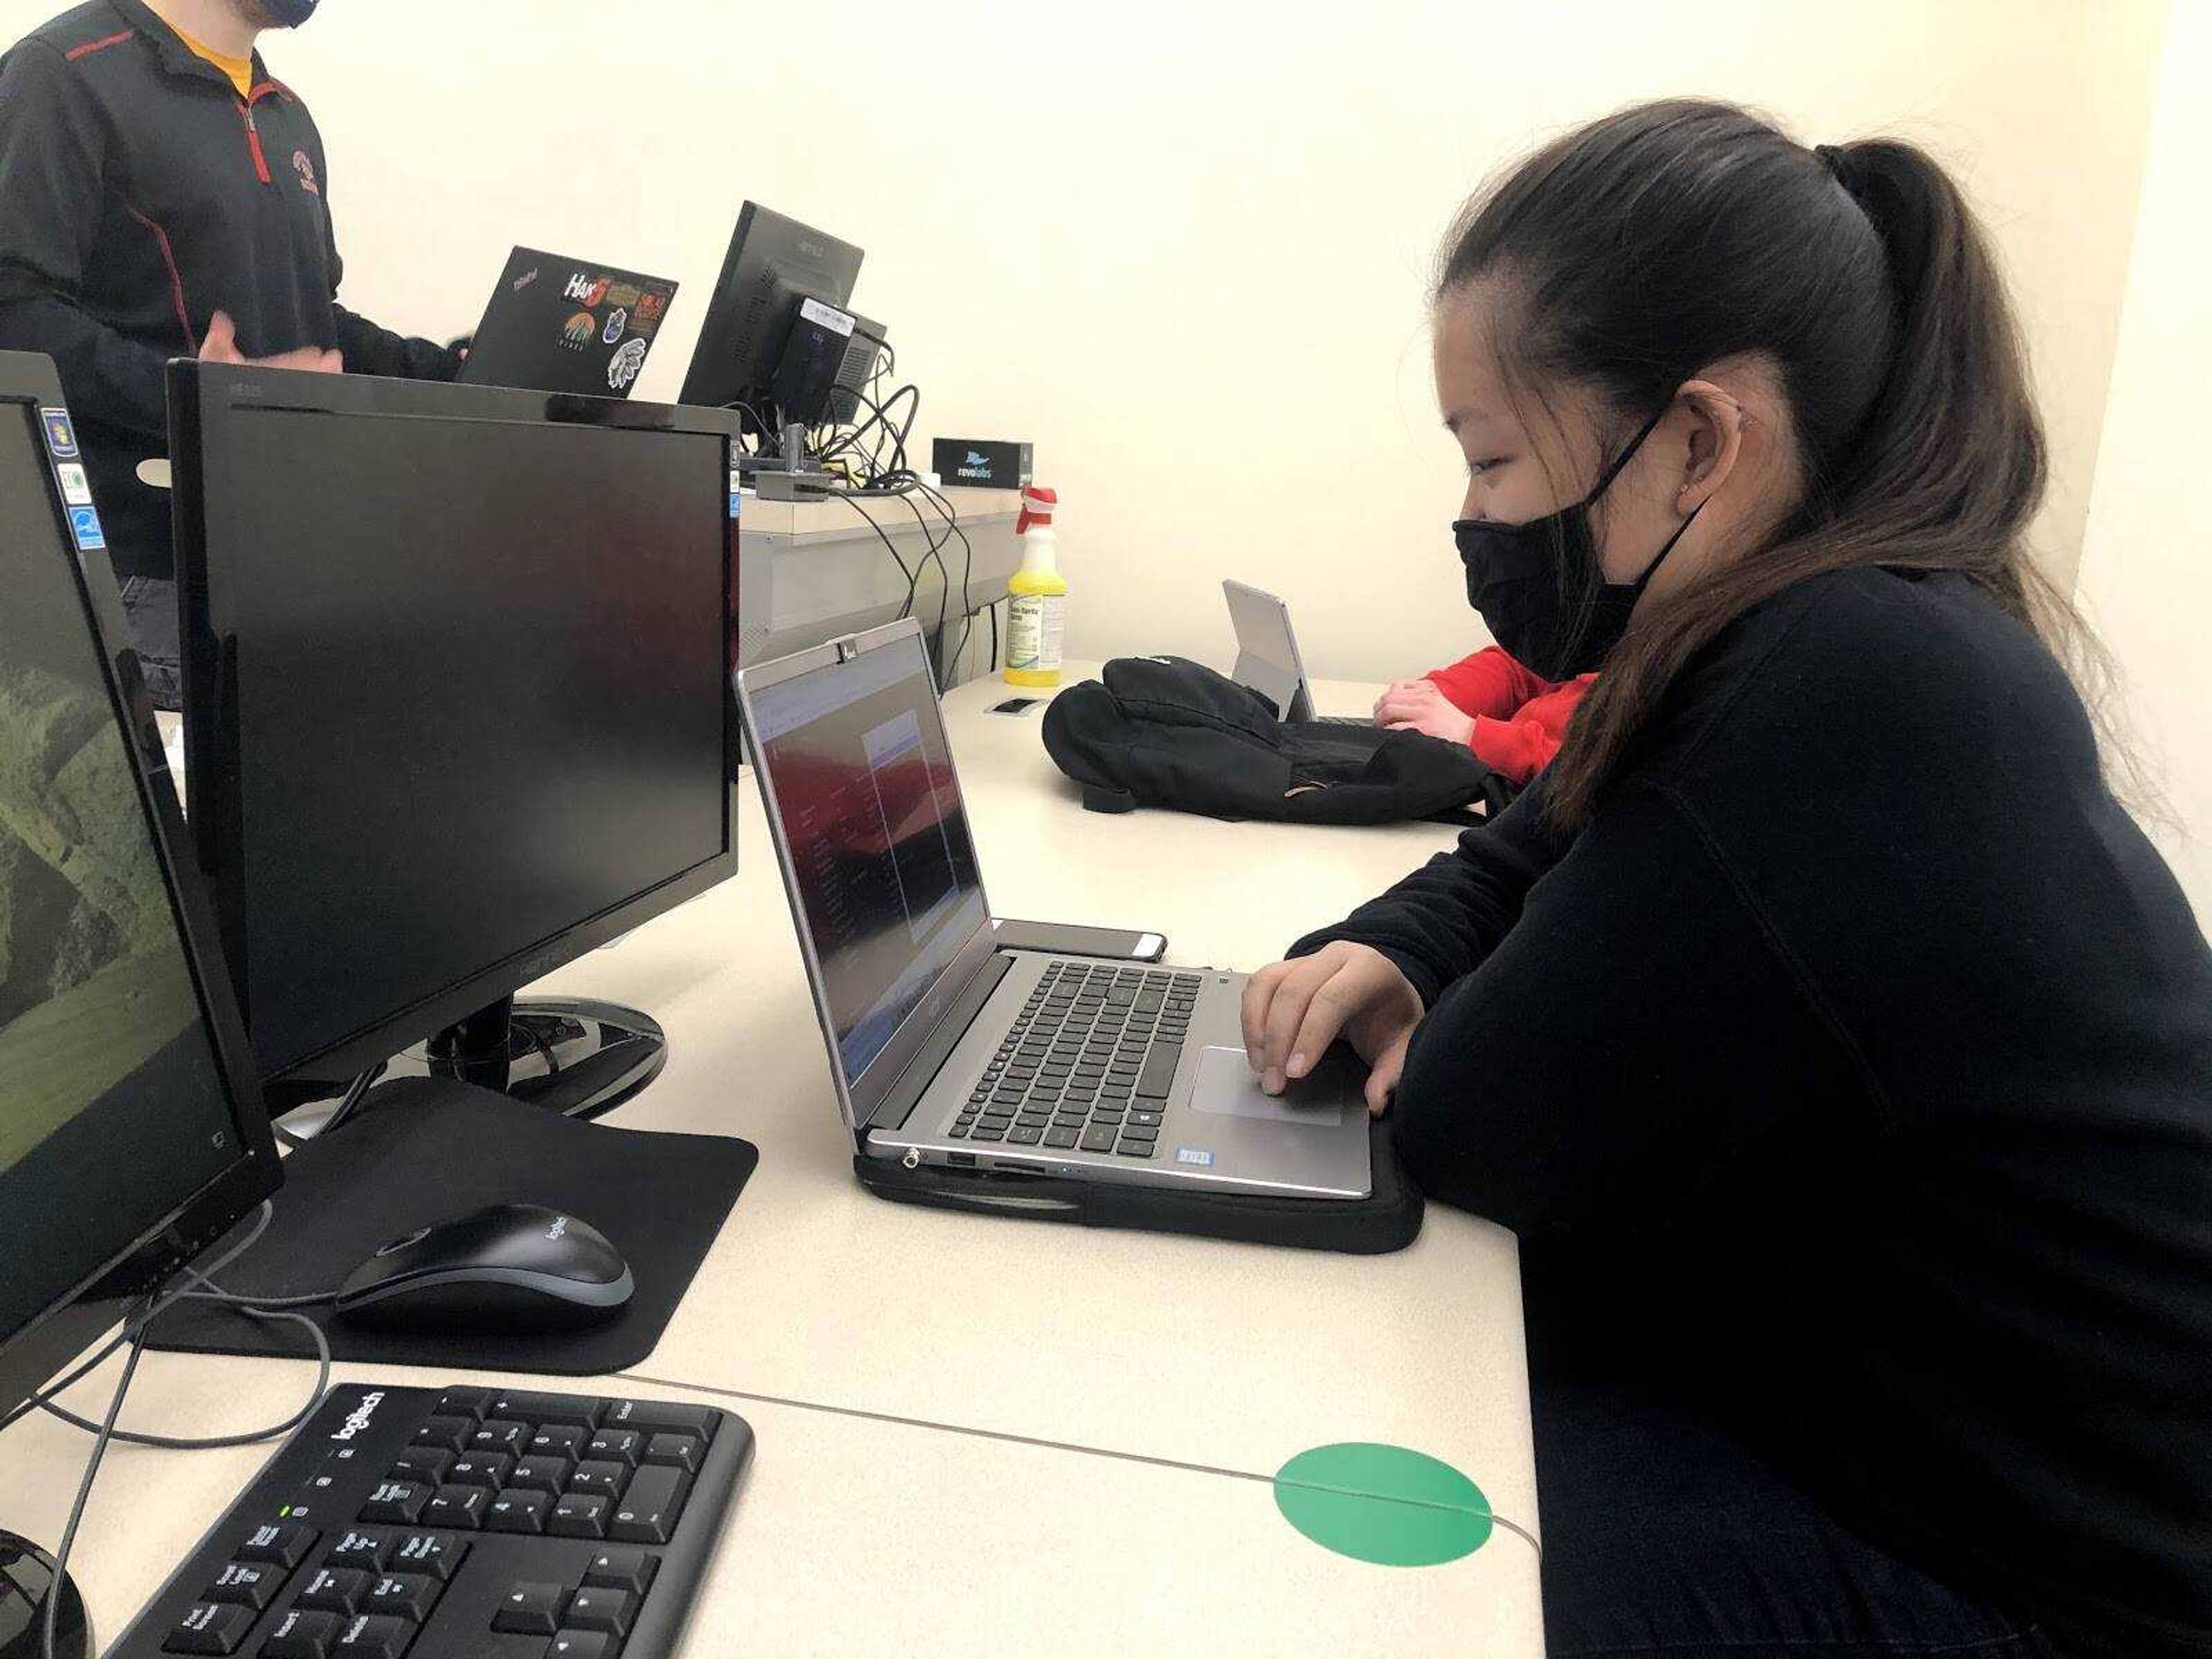 Second-year team member Jennifer Tenholder practices for the Erich J. Spenger Midwest Regional Collegiate Cyber Defense Competition that will be on March 19 and 20.  The Cyber Defense Club practices three days a week to prepare for both the state and regional competition.